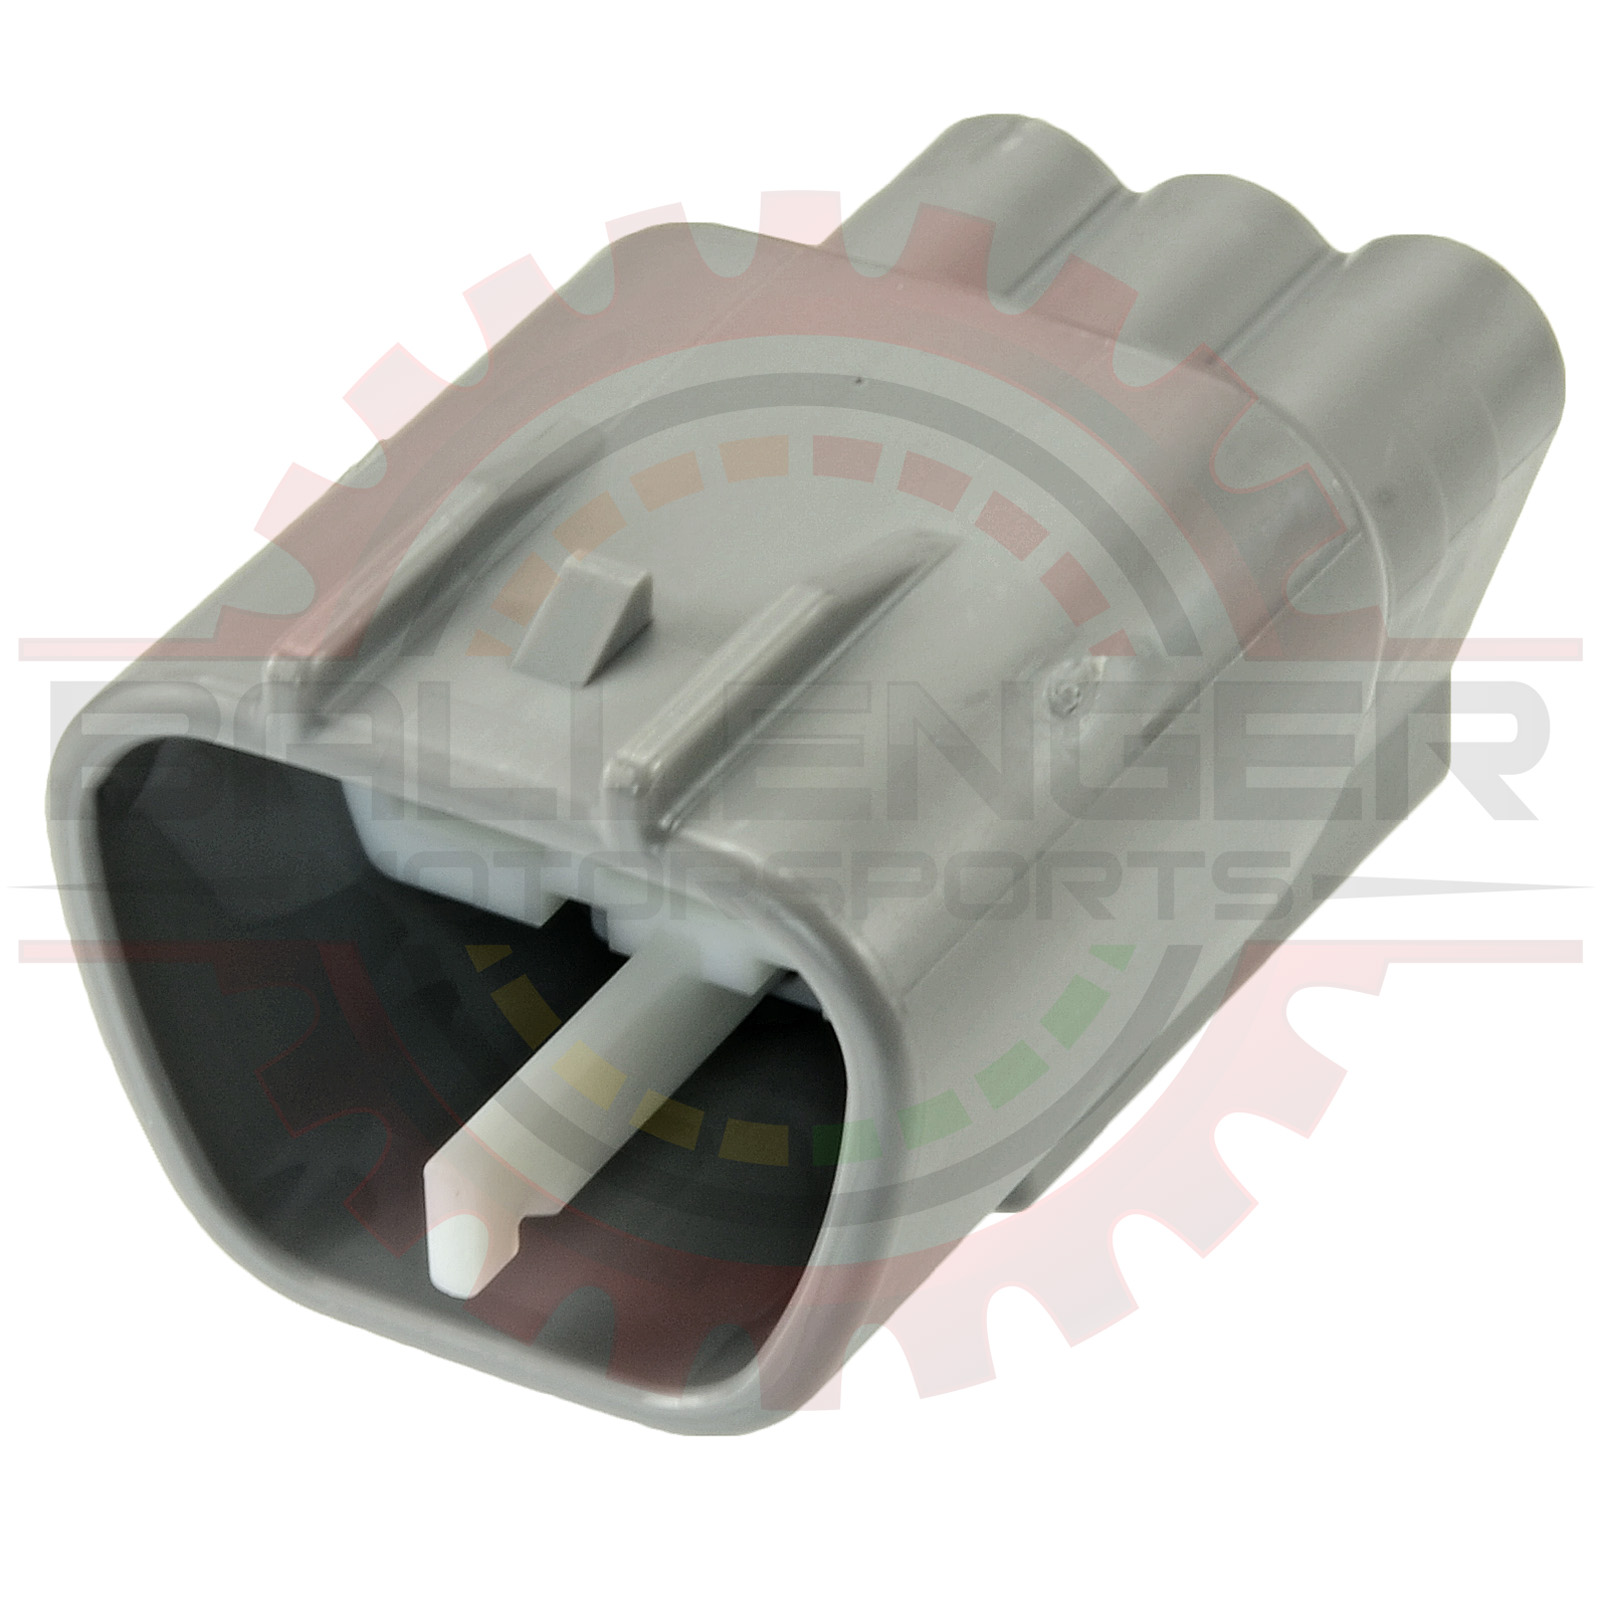 Ballenger Motorsports 5 Way Connector Plug Compatible with NTK AFRM Harness Side Connector Only 